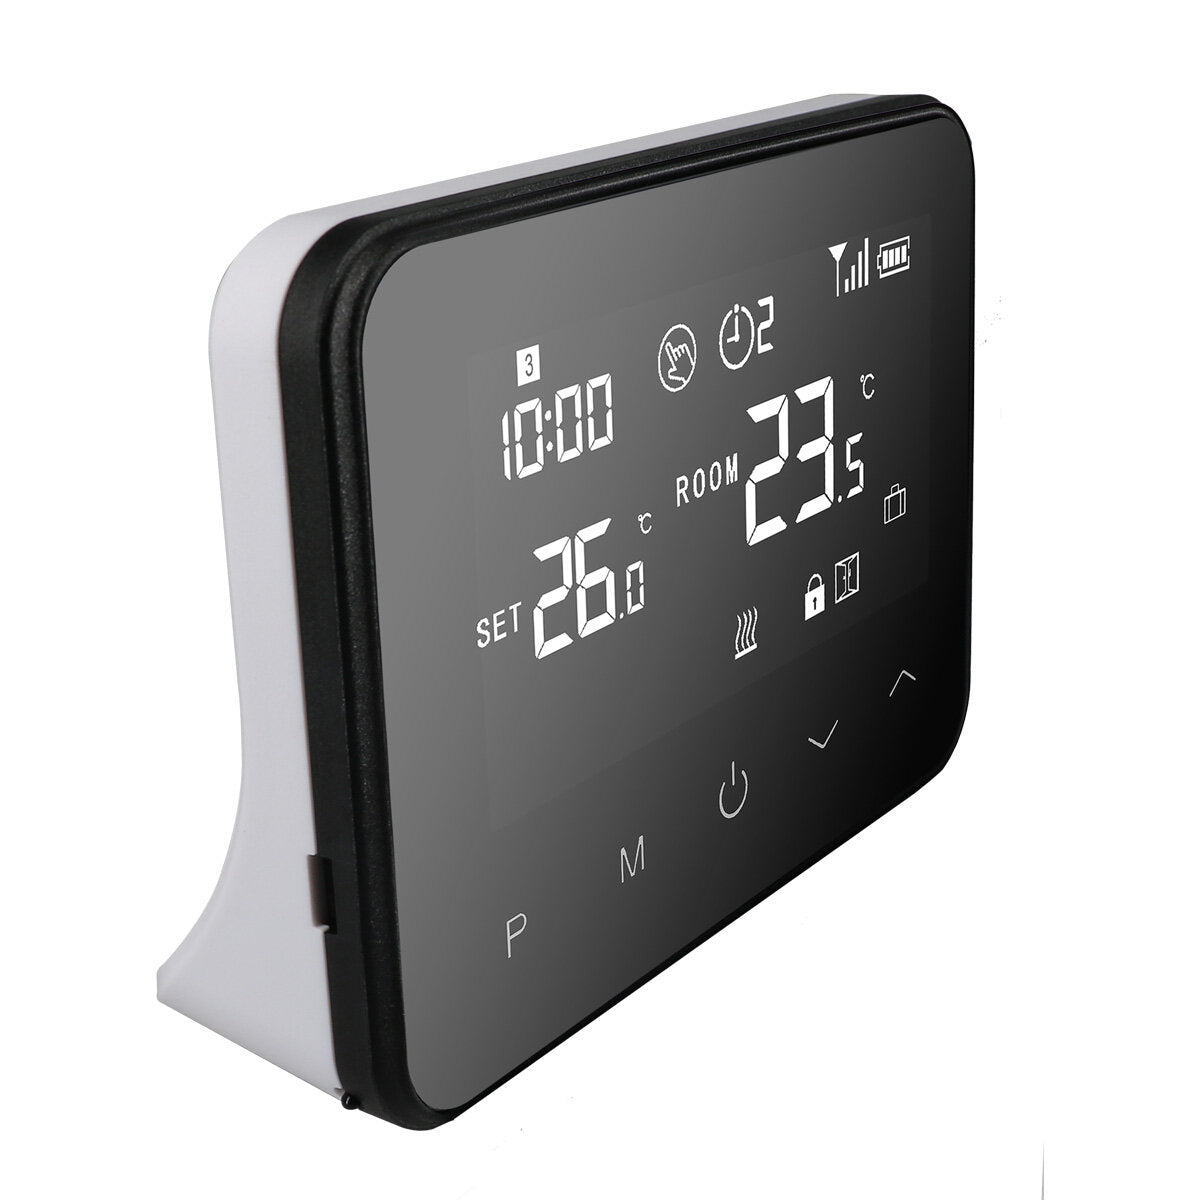 SmartDHOME Comfort.me DUO Opentherm Wireless Chronothermostat